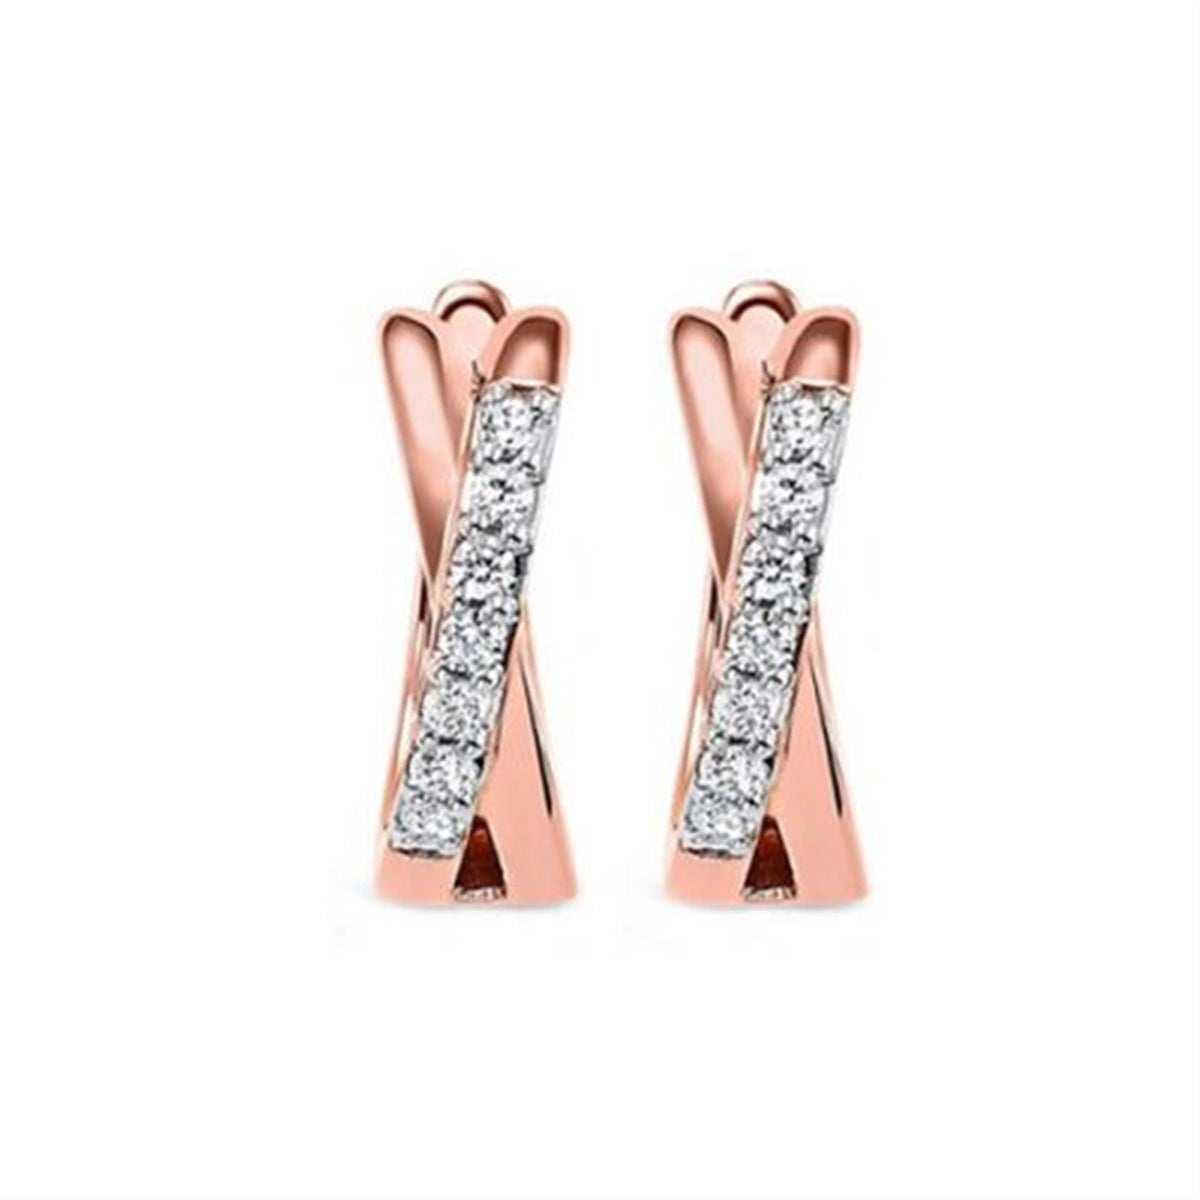 10Kt Rose Gold Twisted Hoop Earrings With .16cttw Natural Diamonds